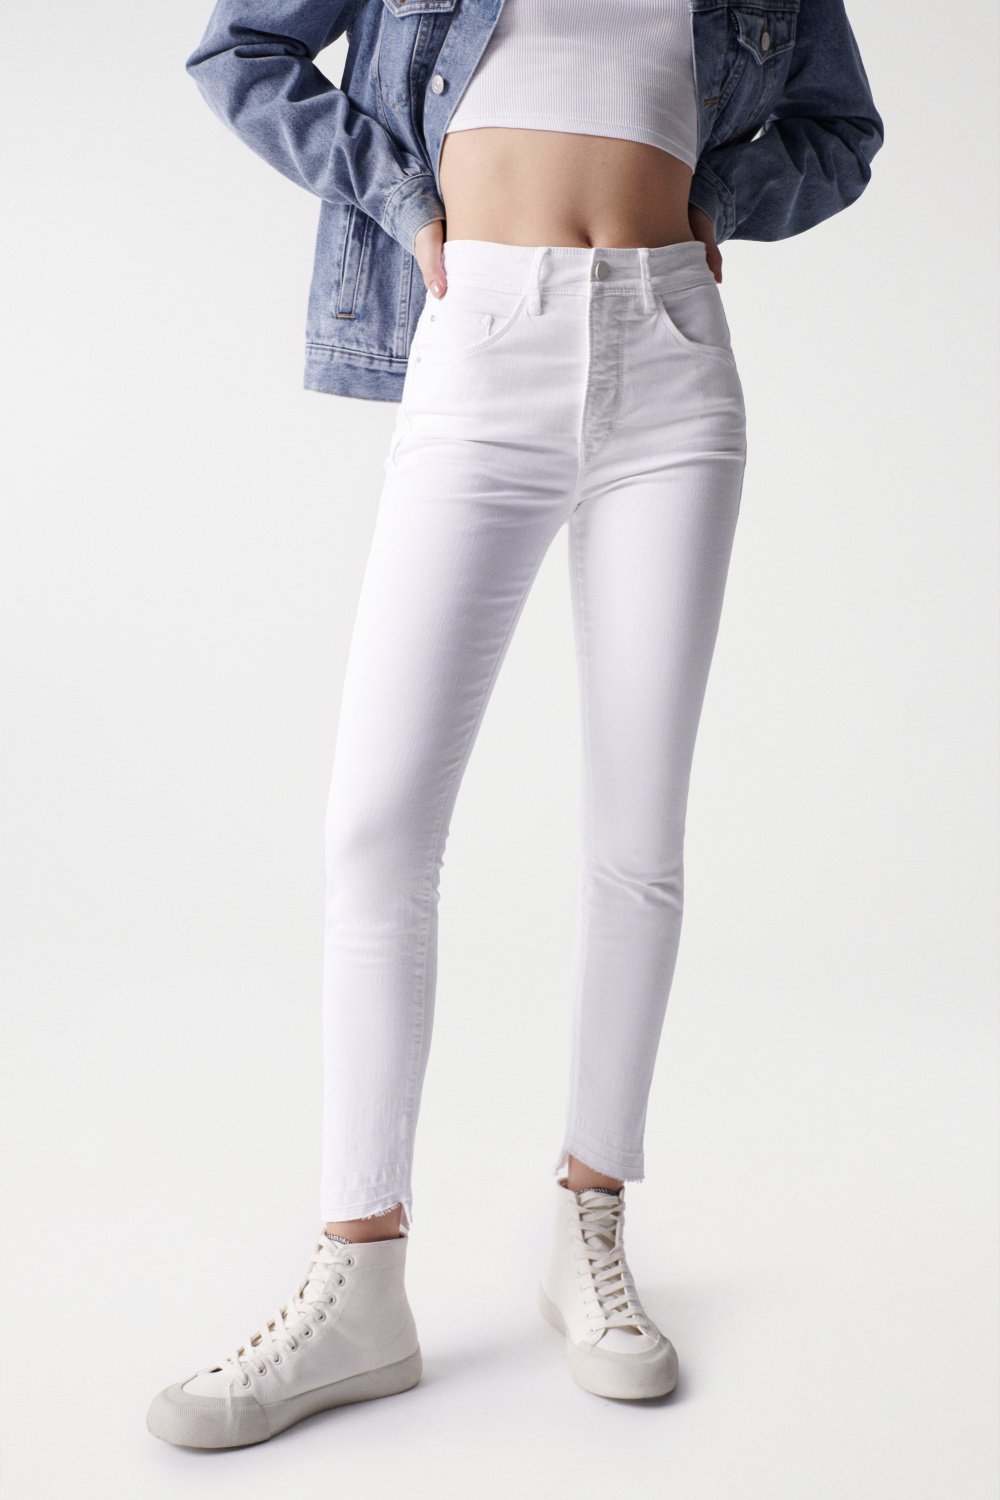 Jeans Secret Glamour, Push In, cropped hose, - Salsa